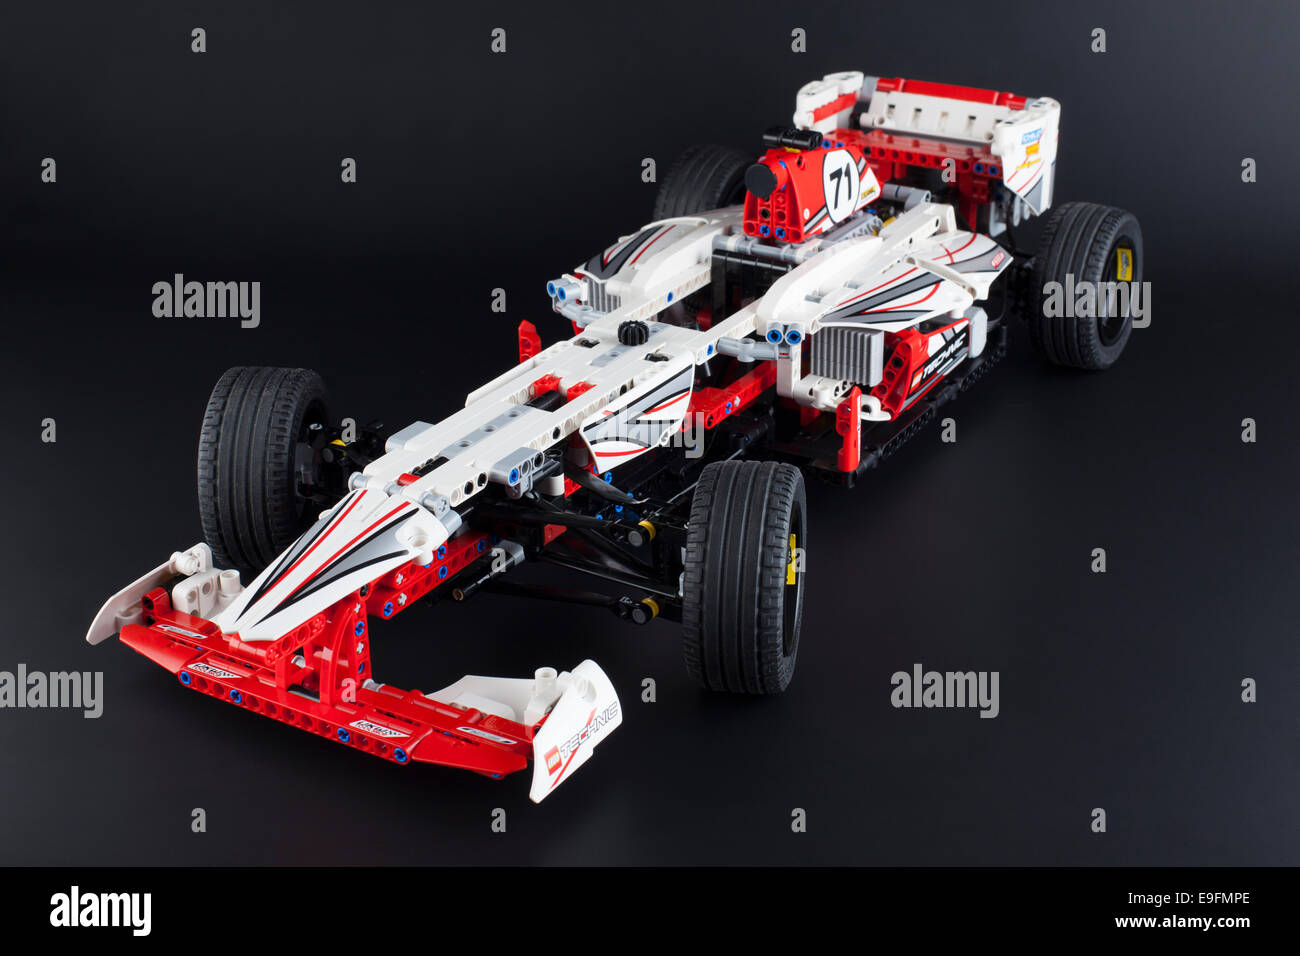 Lego Sports High Resolution Stock Photography and Images - Alamy